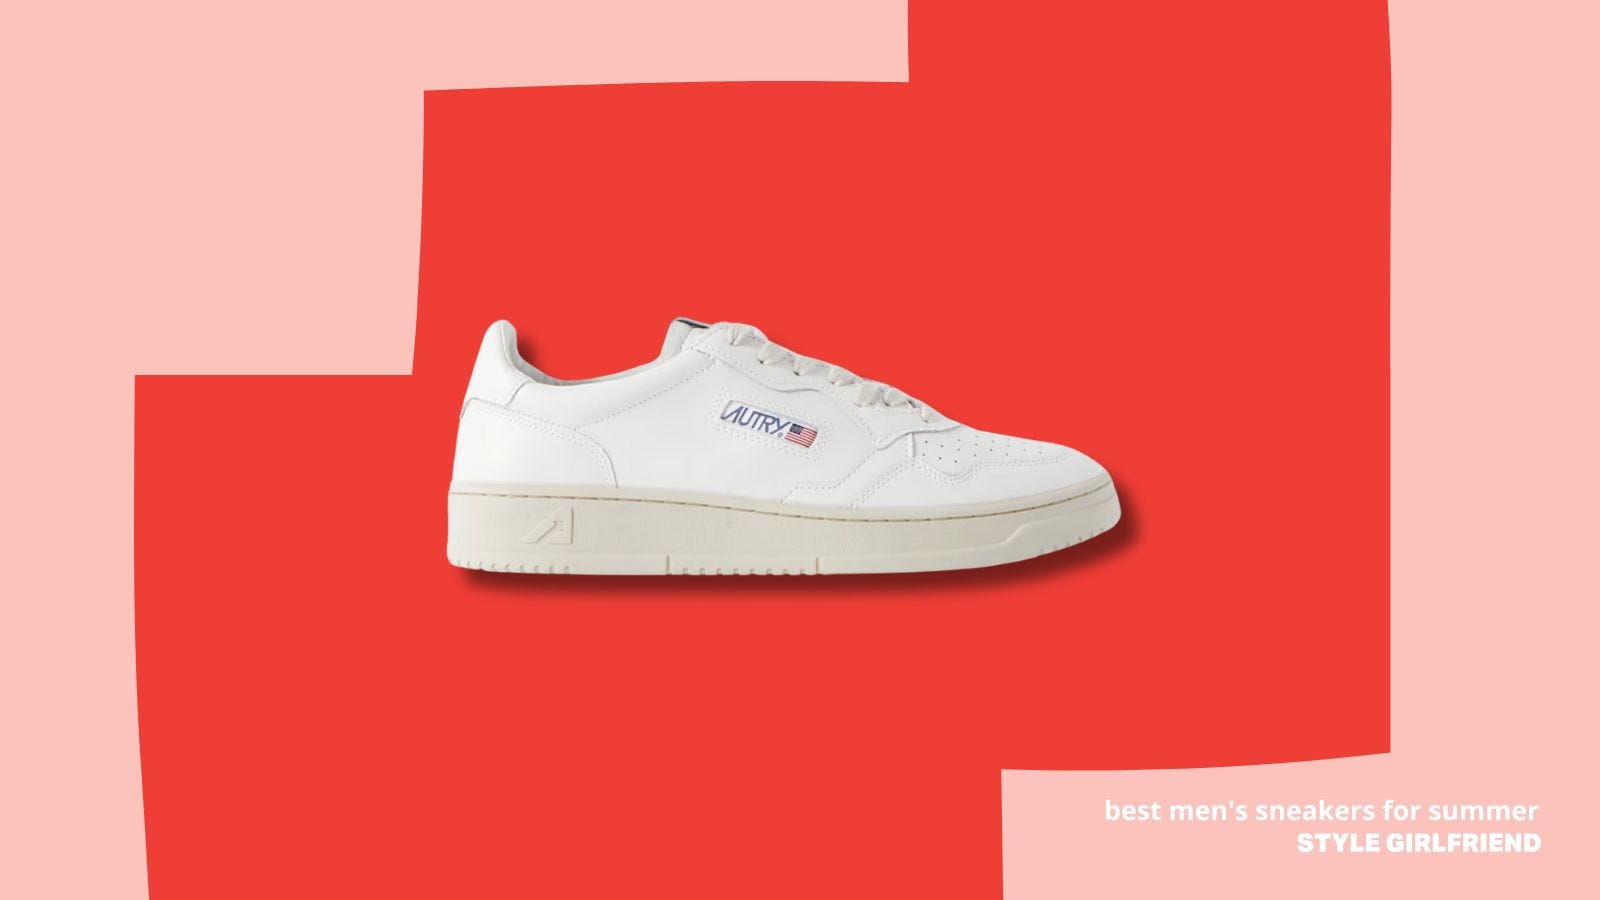 white leather autry sneakers against a red background, text on-screen reads 'best summer sneakers for men'